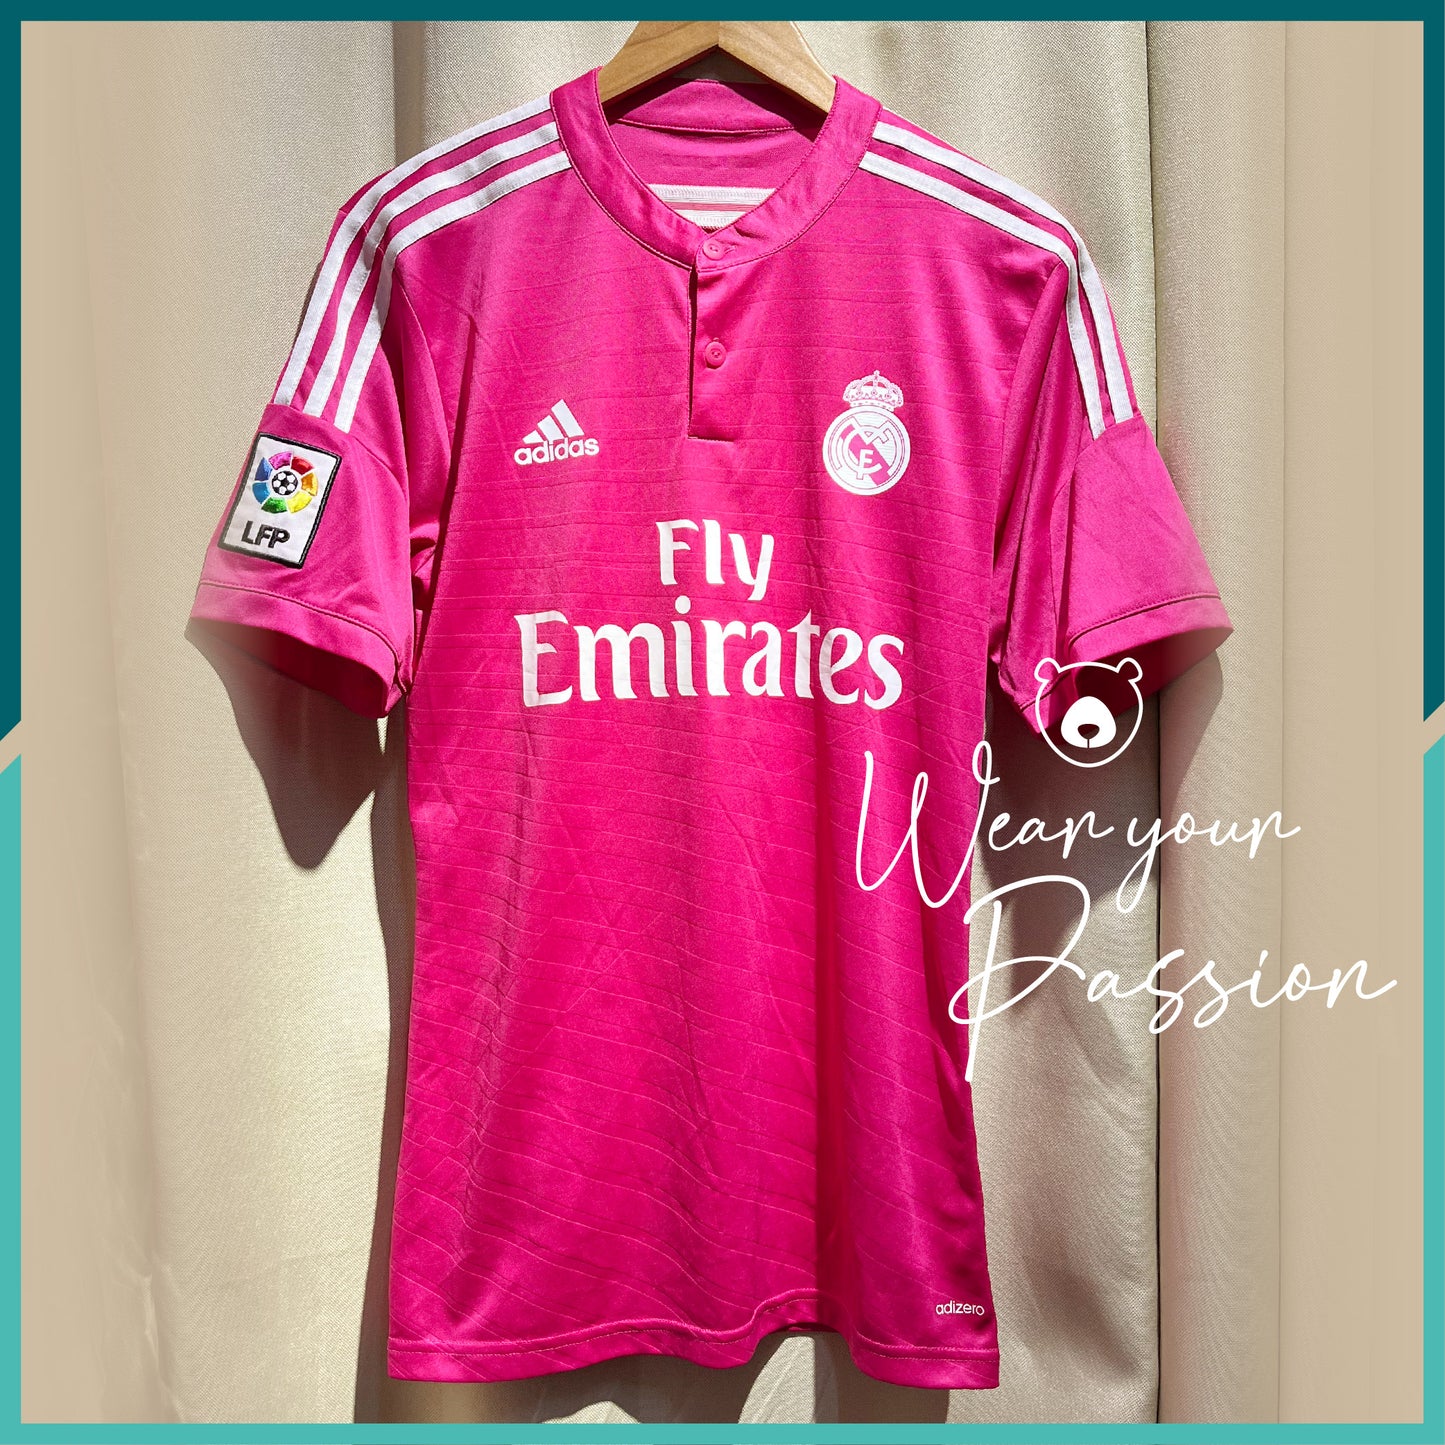 [Nameset Included] Authentic 2014-15 Real Madrid Away Jersey